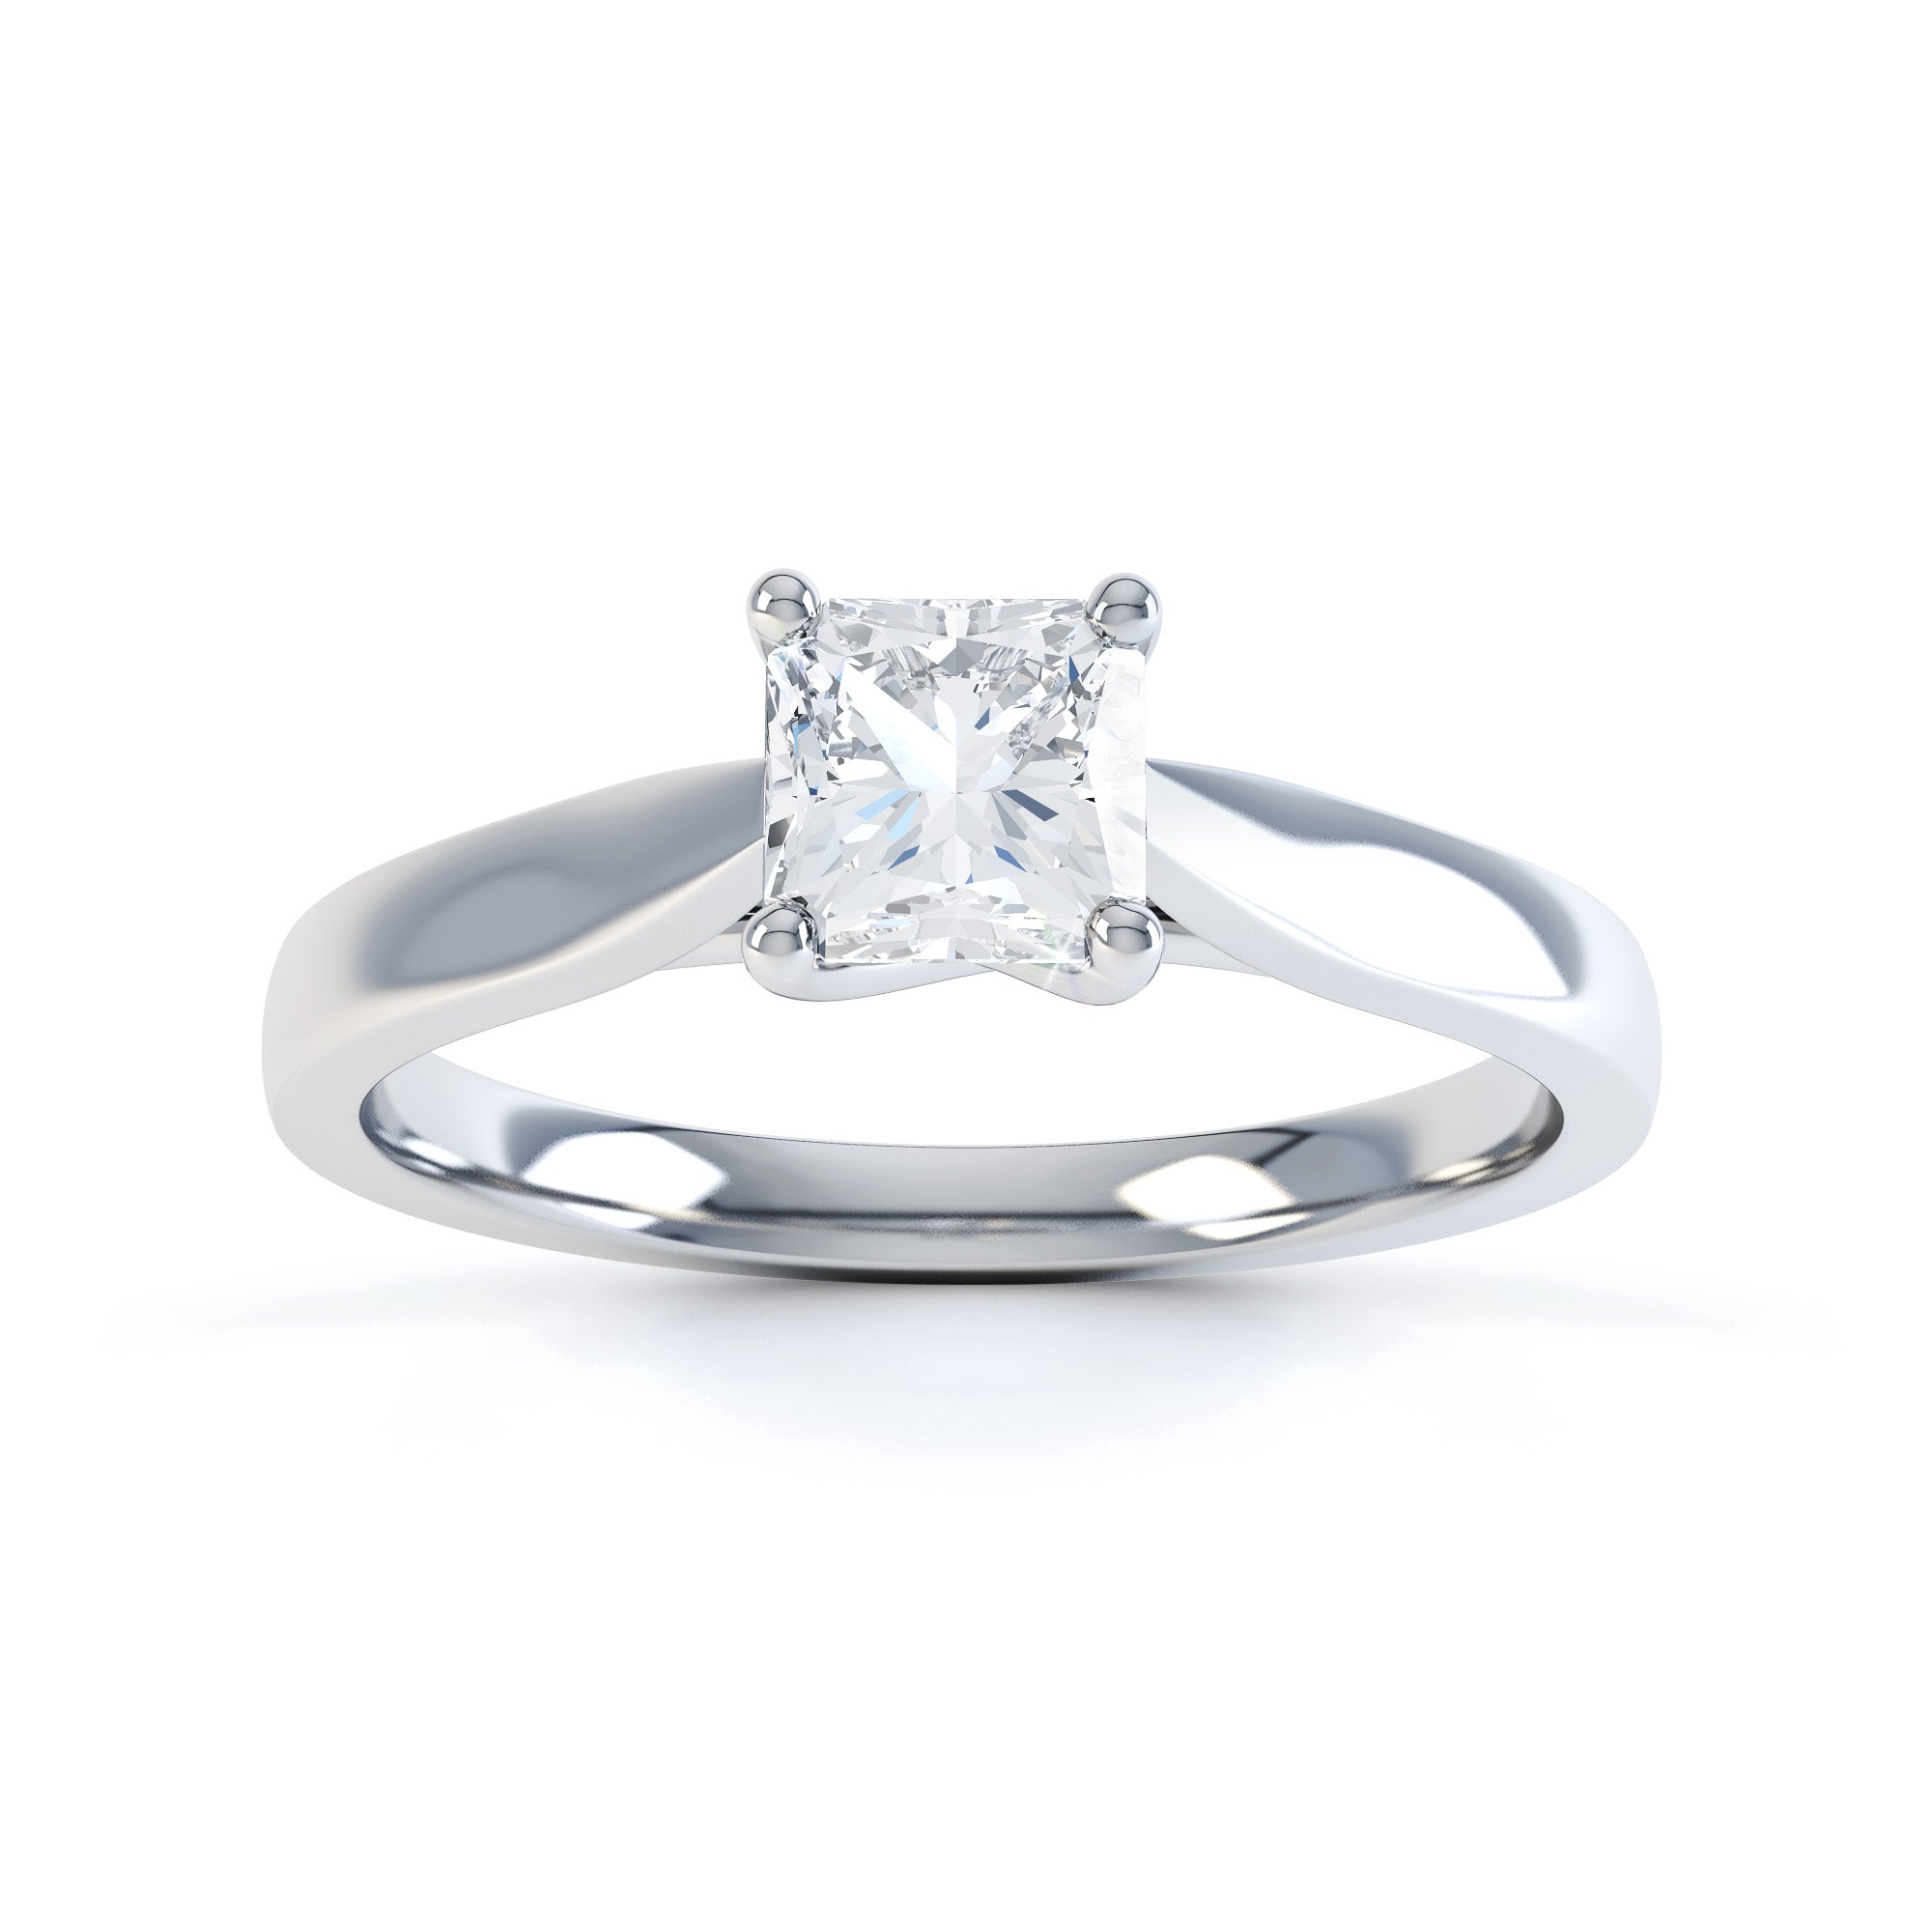 Radiant Cut Centre Stone, 4 claw, Diamond Engagement Ring with Tapered Shoulders